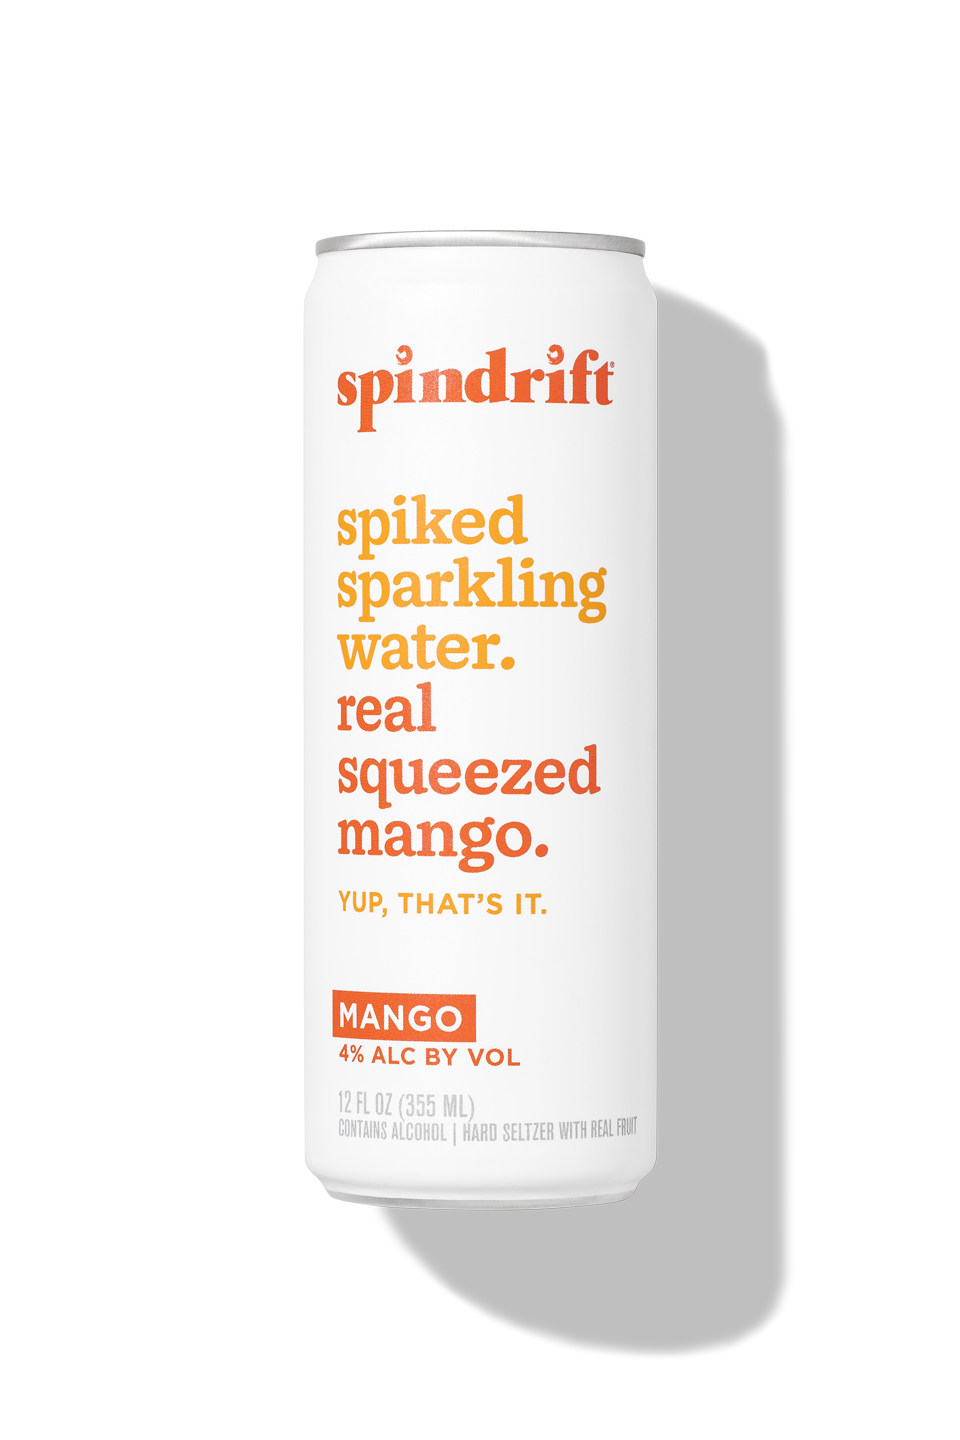 Spindrift Spiked Packaging, Branding and Design by Colony